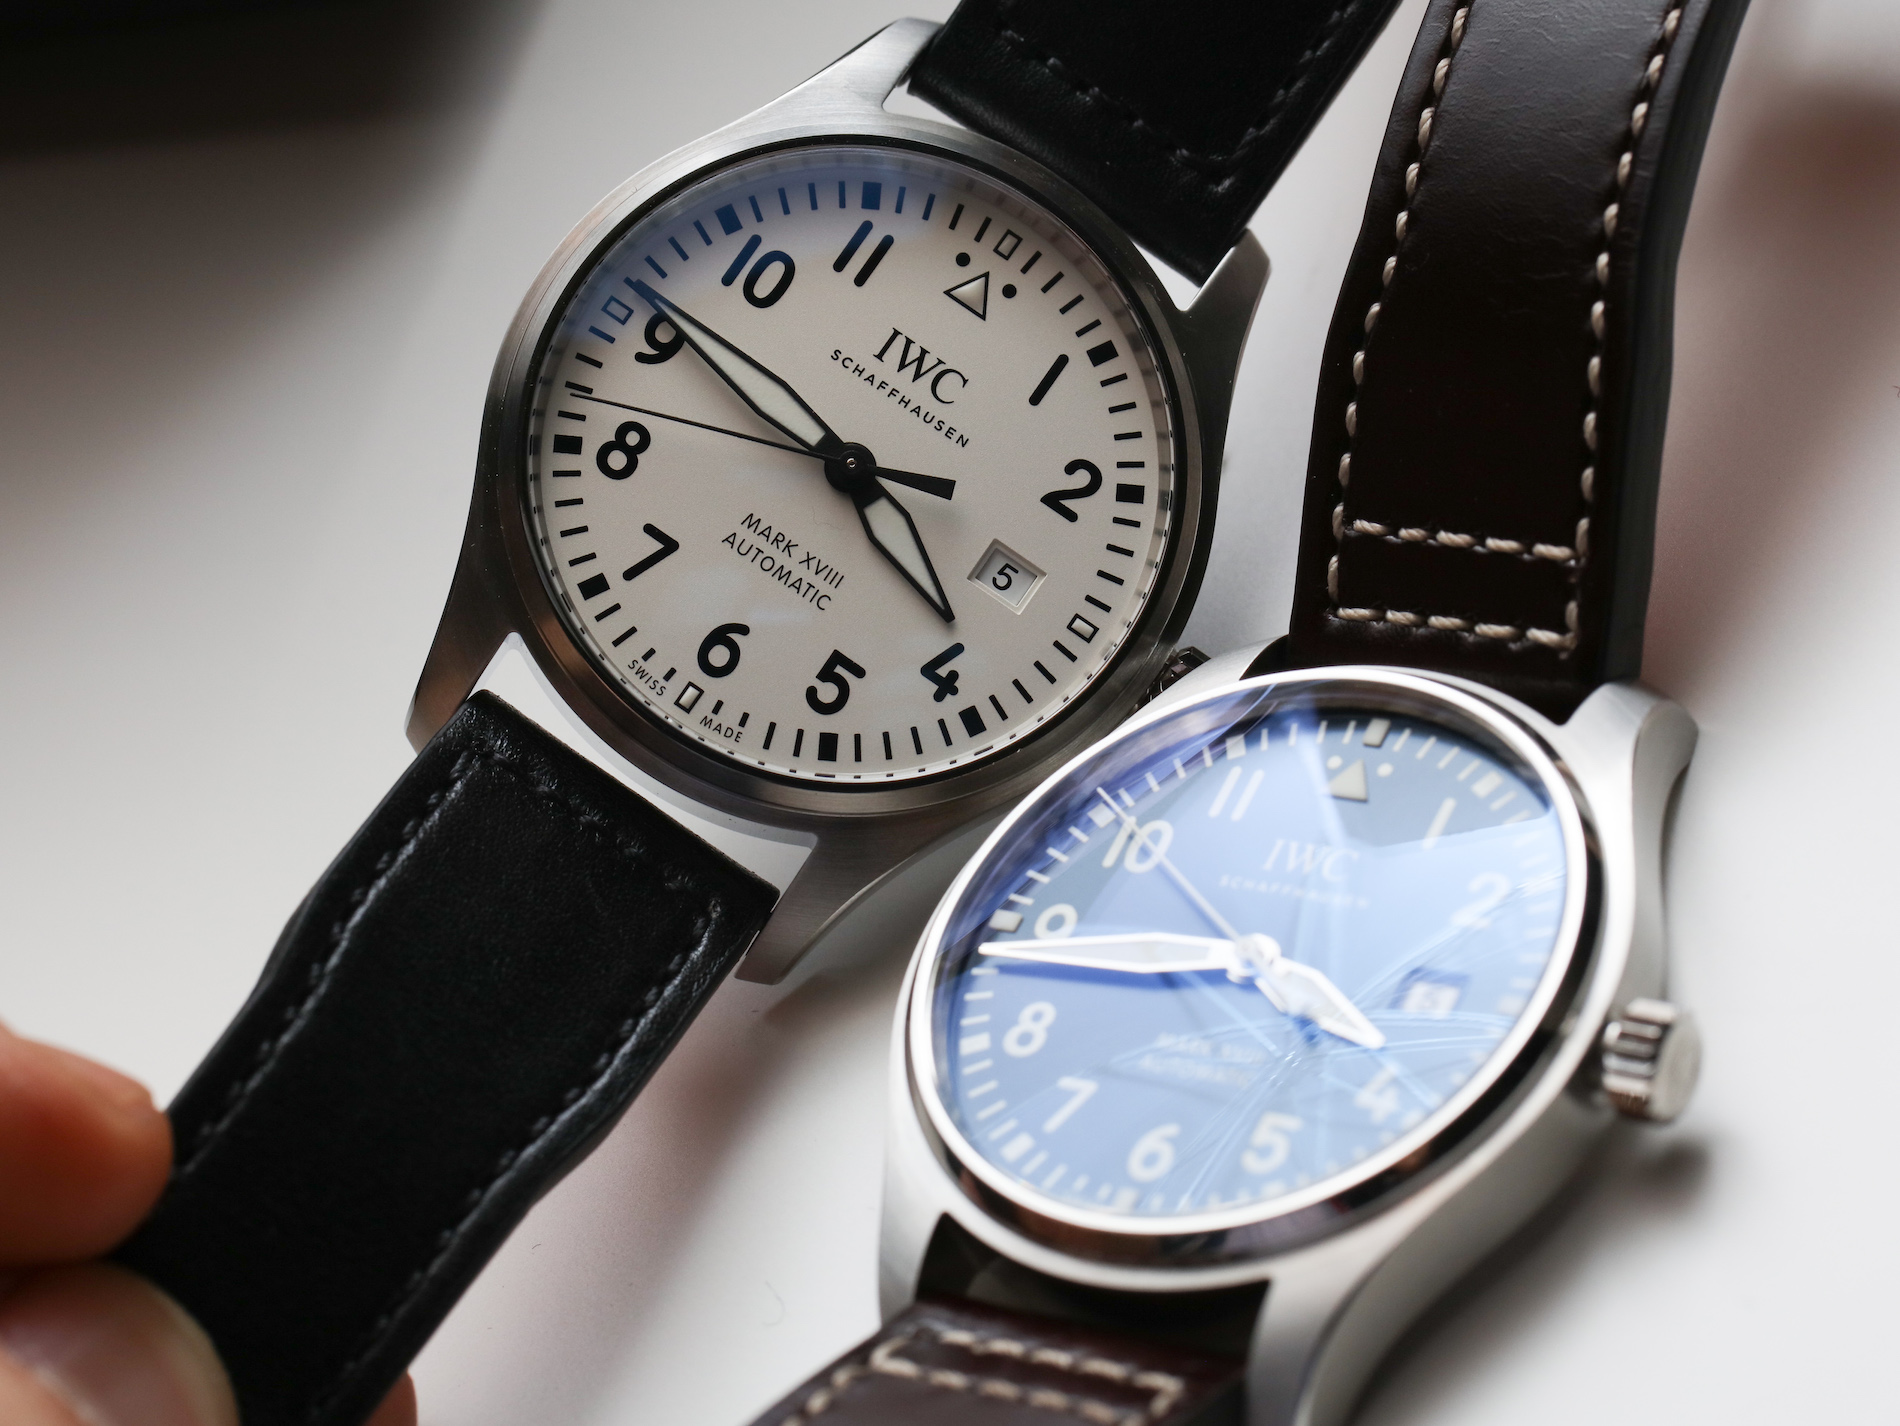 Cost Of Entry: IWC Watches